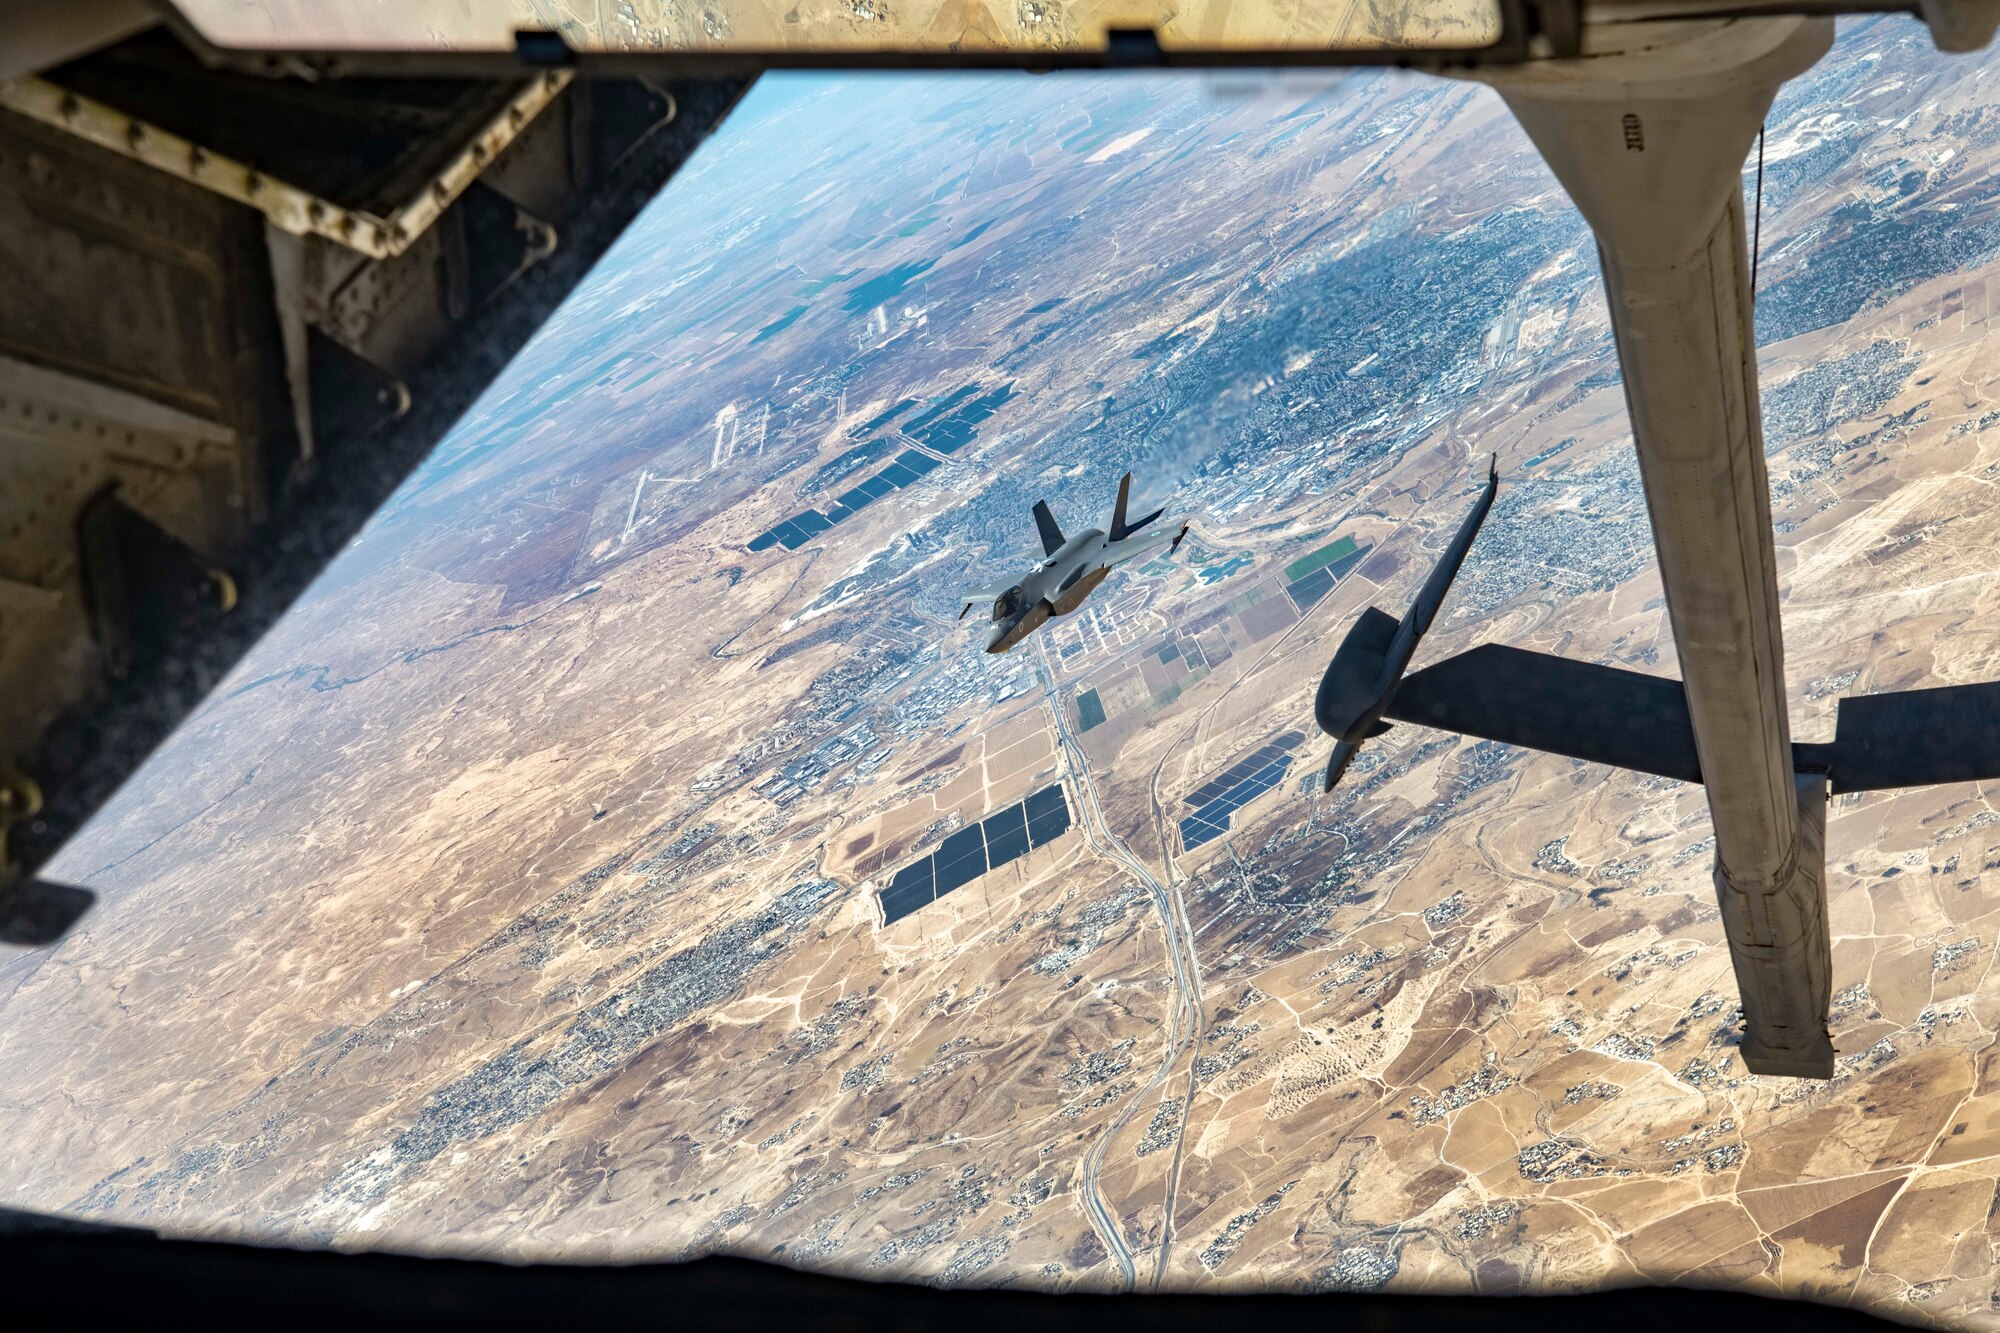 An Israeli Air Force F-35I Lightning II “Adir” approaches a U.S. Air Force 908th Expeditionary Refueling Squadron KC-10 Extender to refuel during “Enduring Lightning II” exercise over southern Israel Aug. 2, 2020. While forging a resolute partnership, the allies train to maintain a ready posture to deter against regional aggressors. (U.S. Air Force photo by Master Sgt. Patrick OReilly)